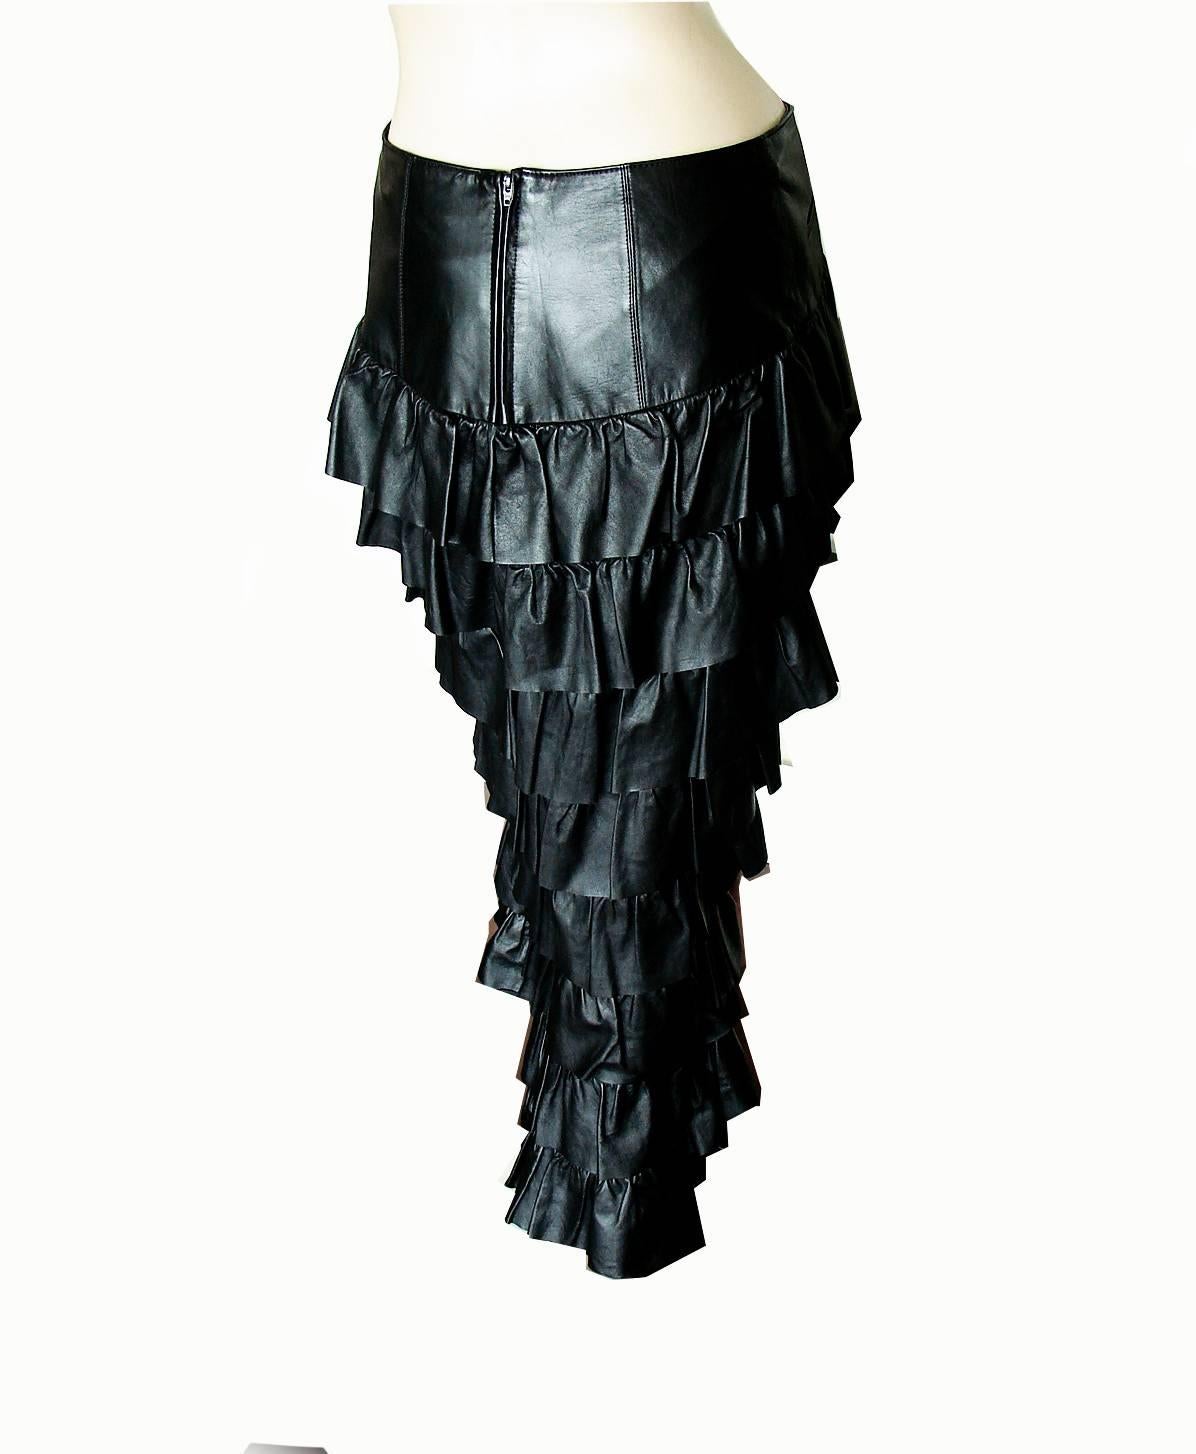 This fabulous skirt is from the Chanel Fall 2001 Collection. Made from the softest calfskin leather, it features rows of gorgeous layered leather ruffles with
sheer panels underneath.  The front has a sleek leather panel that is shorter in front